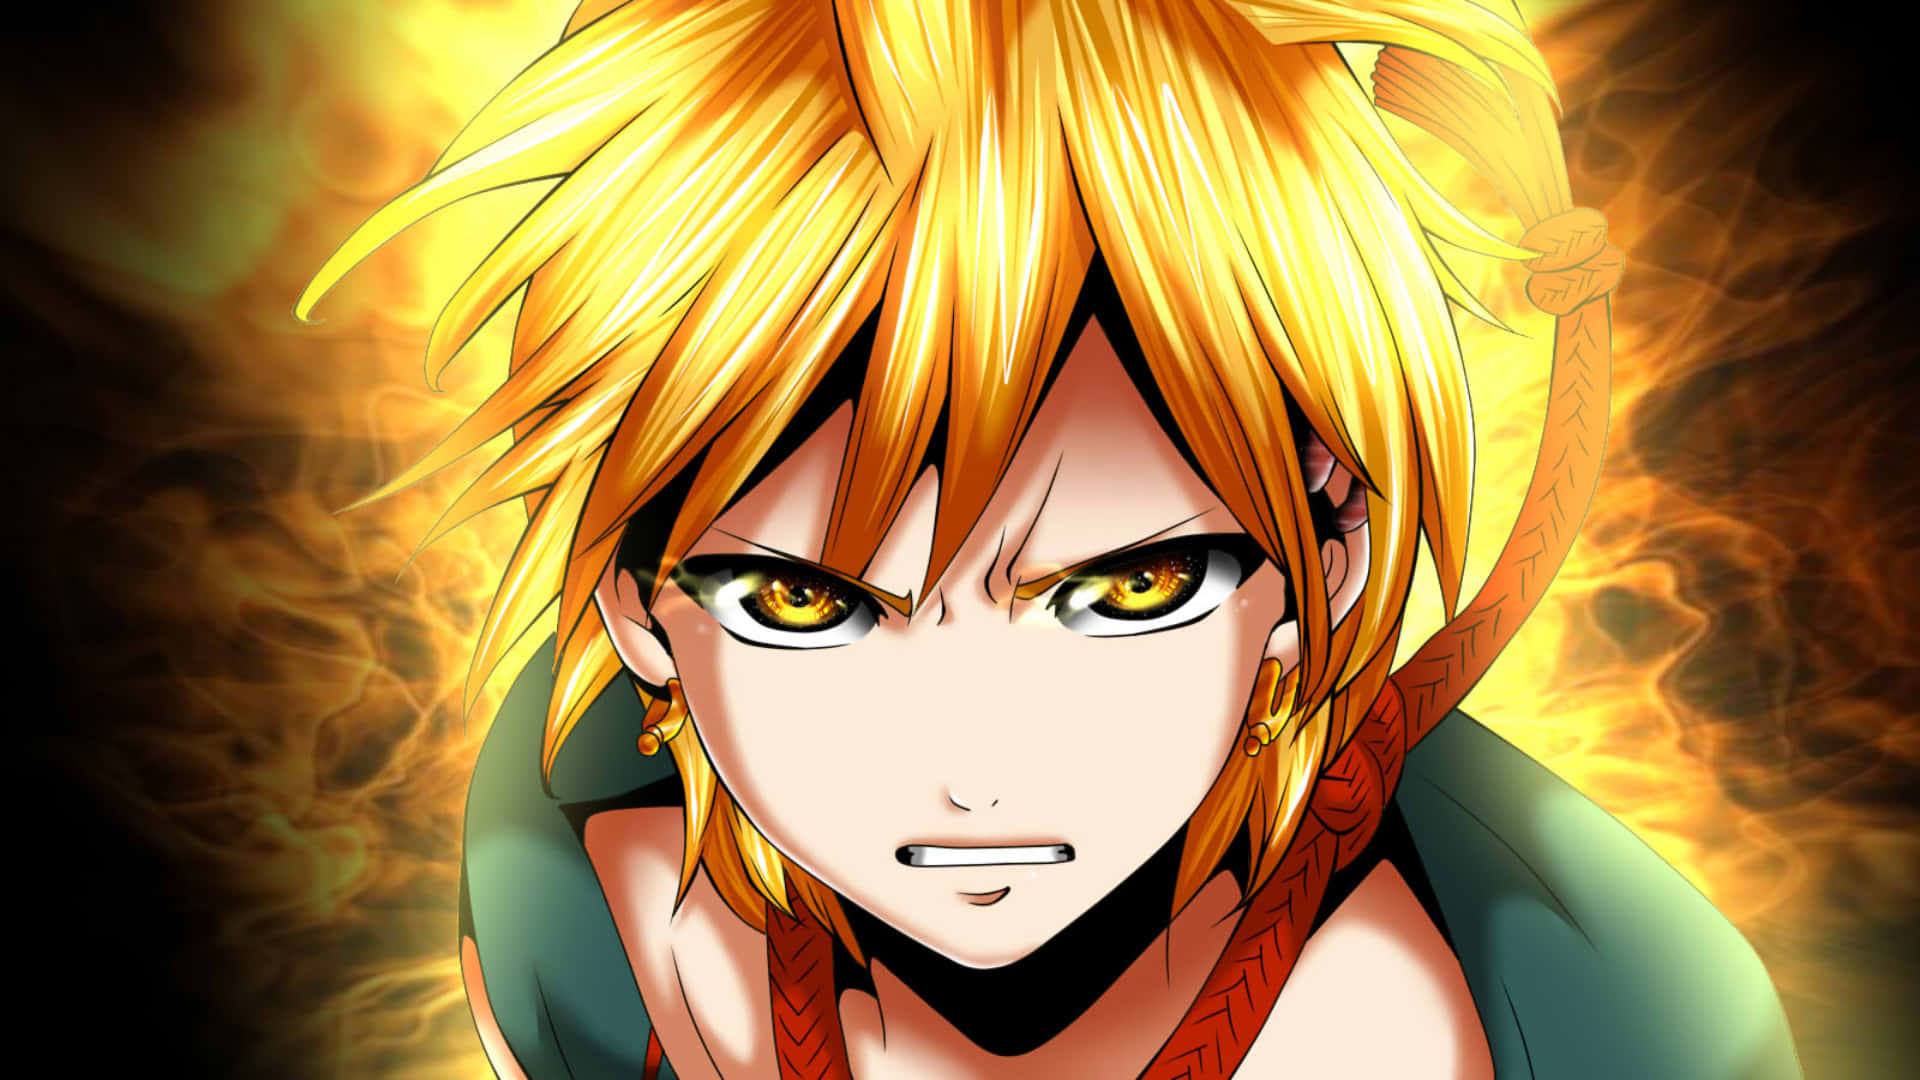 Download Alibaba Saluja - The Mighty King From The Anime Magi Wallpaper ...